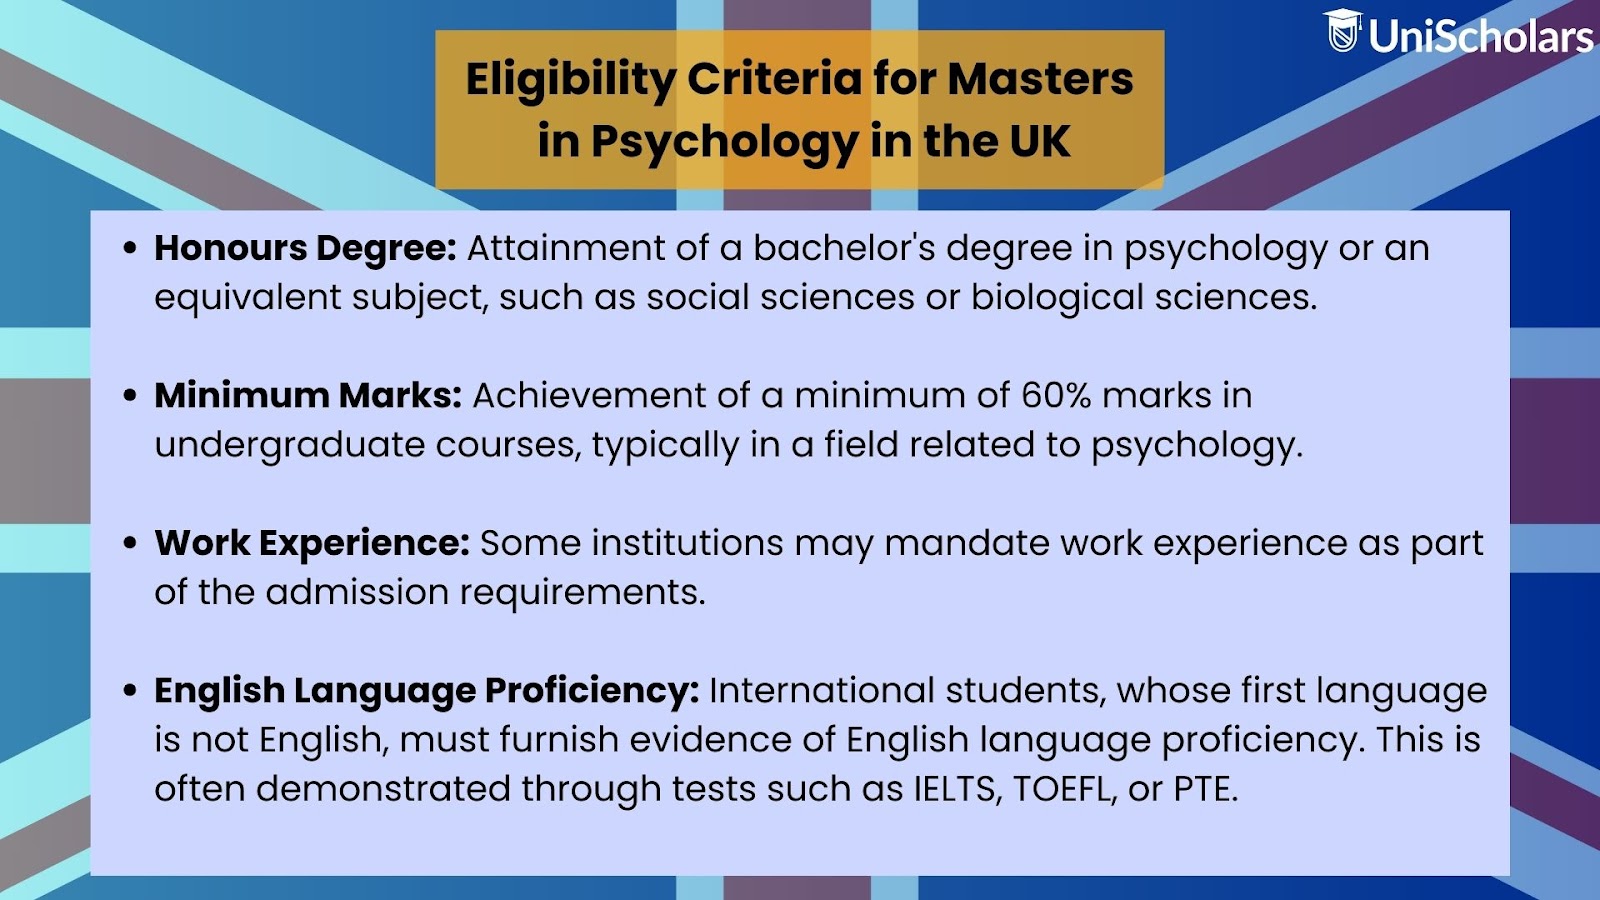 Eligibility Criteria for Masters in Psychology in UK